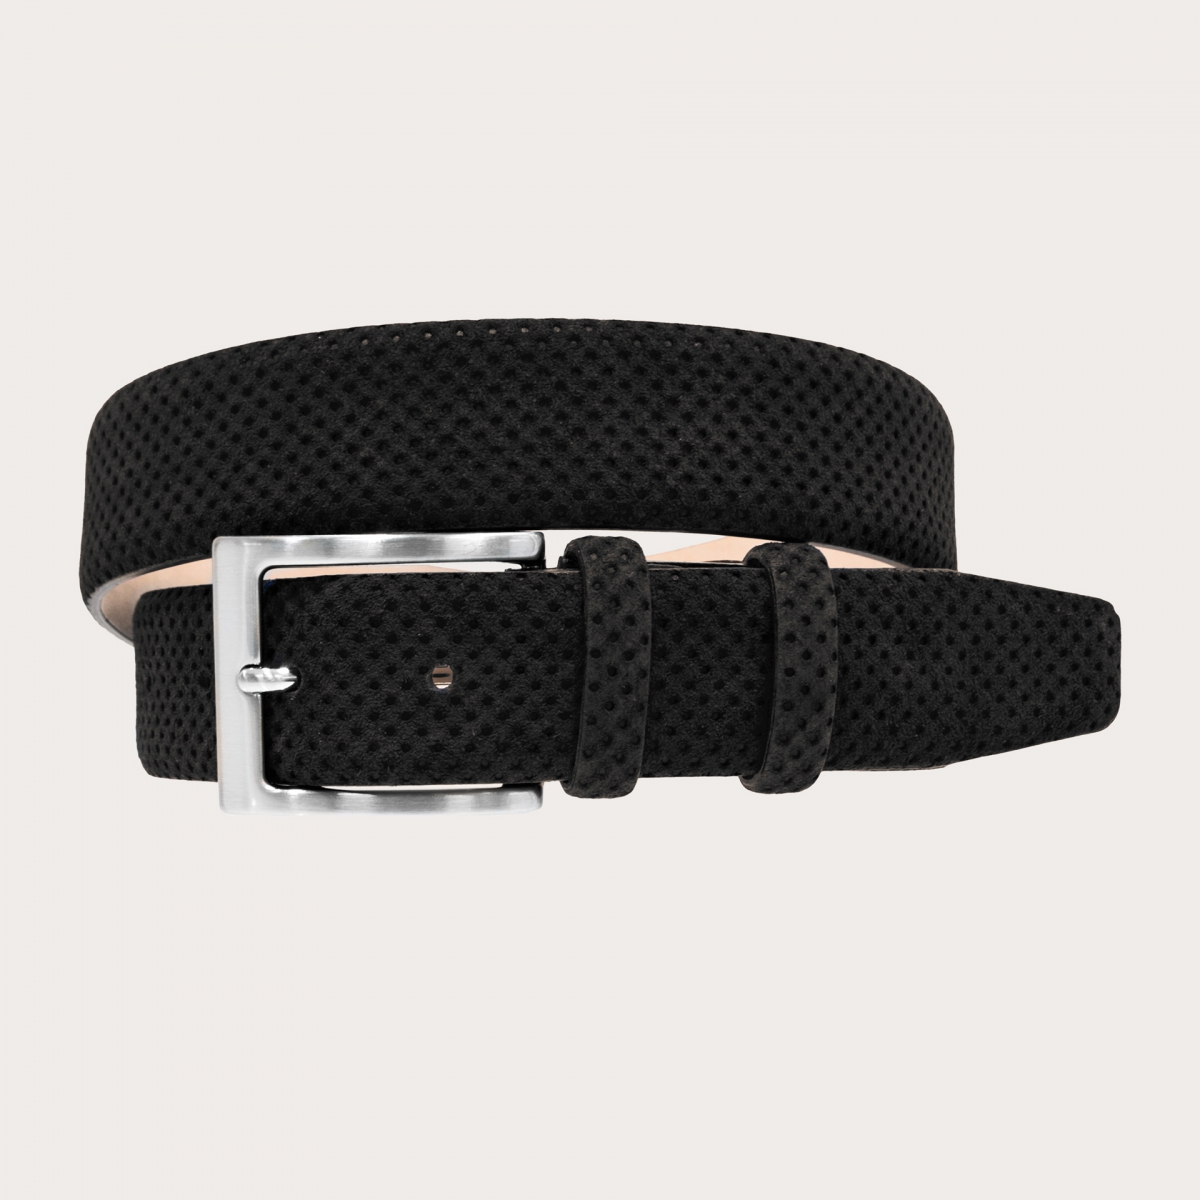 BRUCLE Black belt in drilled pattern suede leather